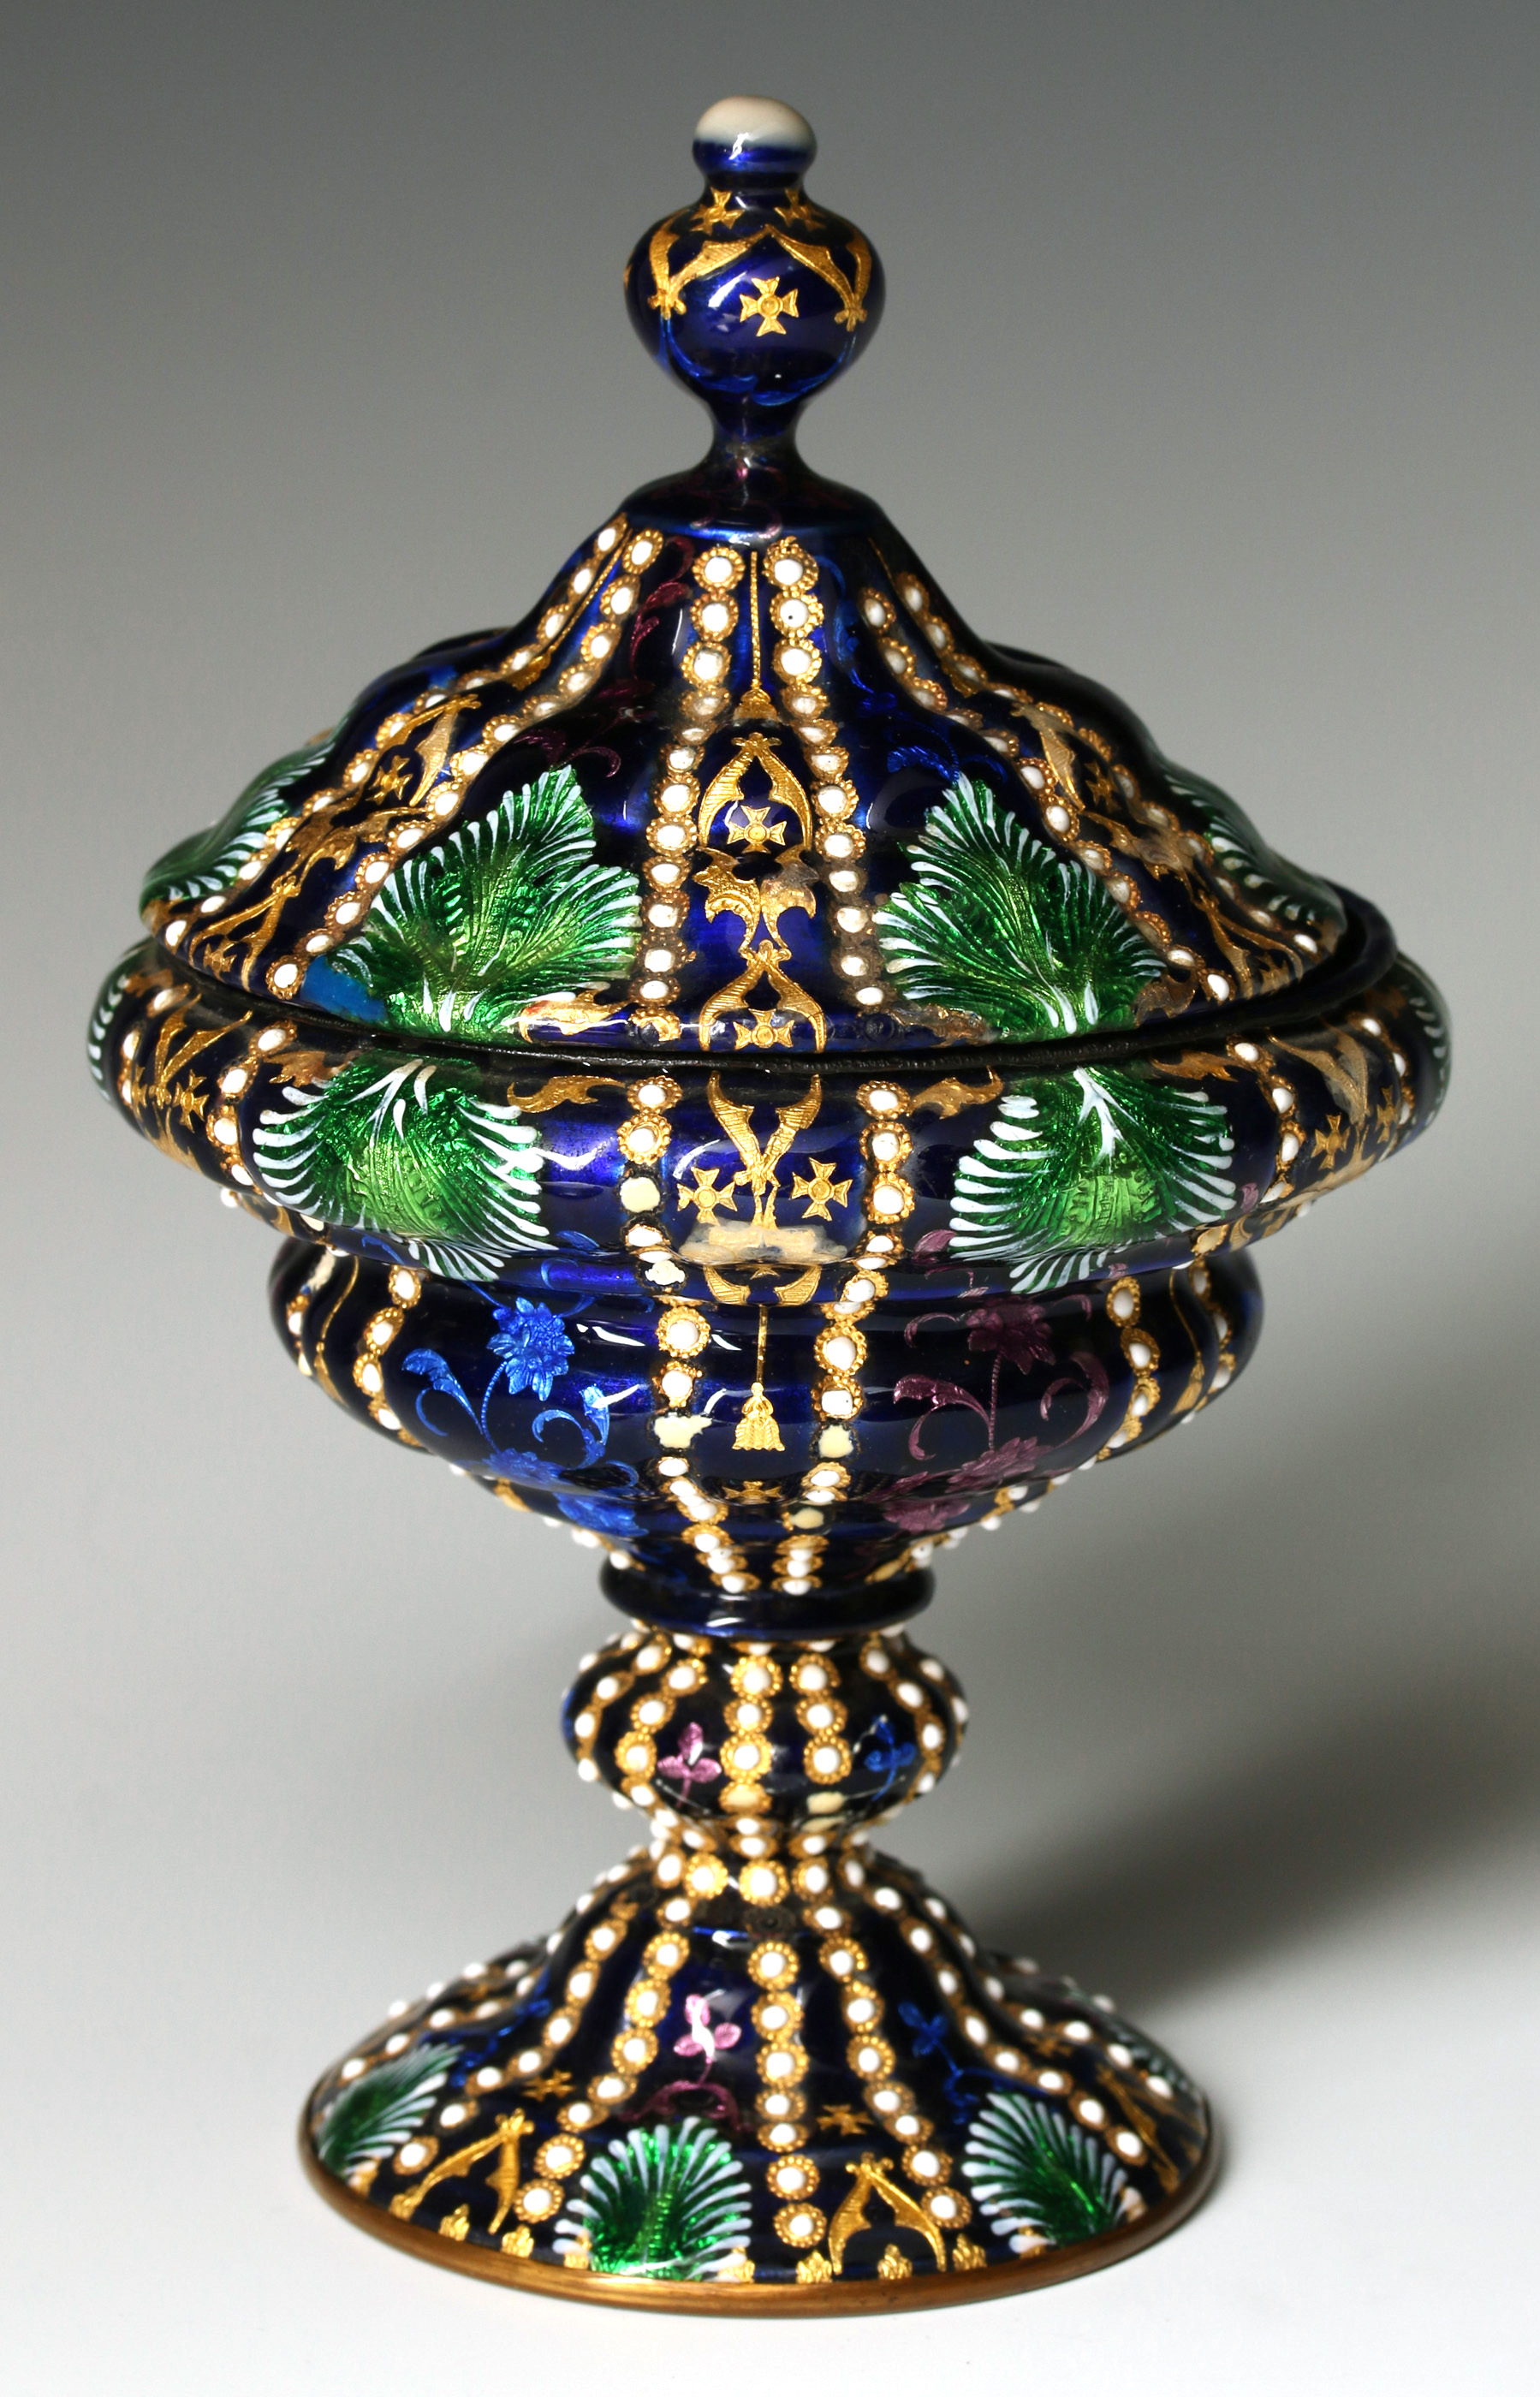 A CIRCA 1900 CONTINENTAL ENAMEL ON COPPER COVERED 